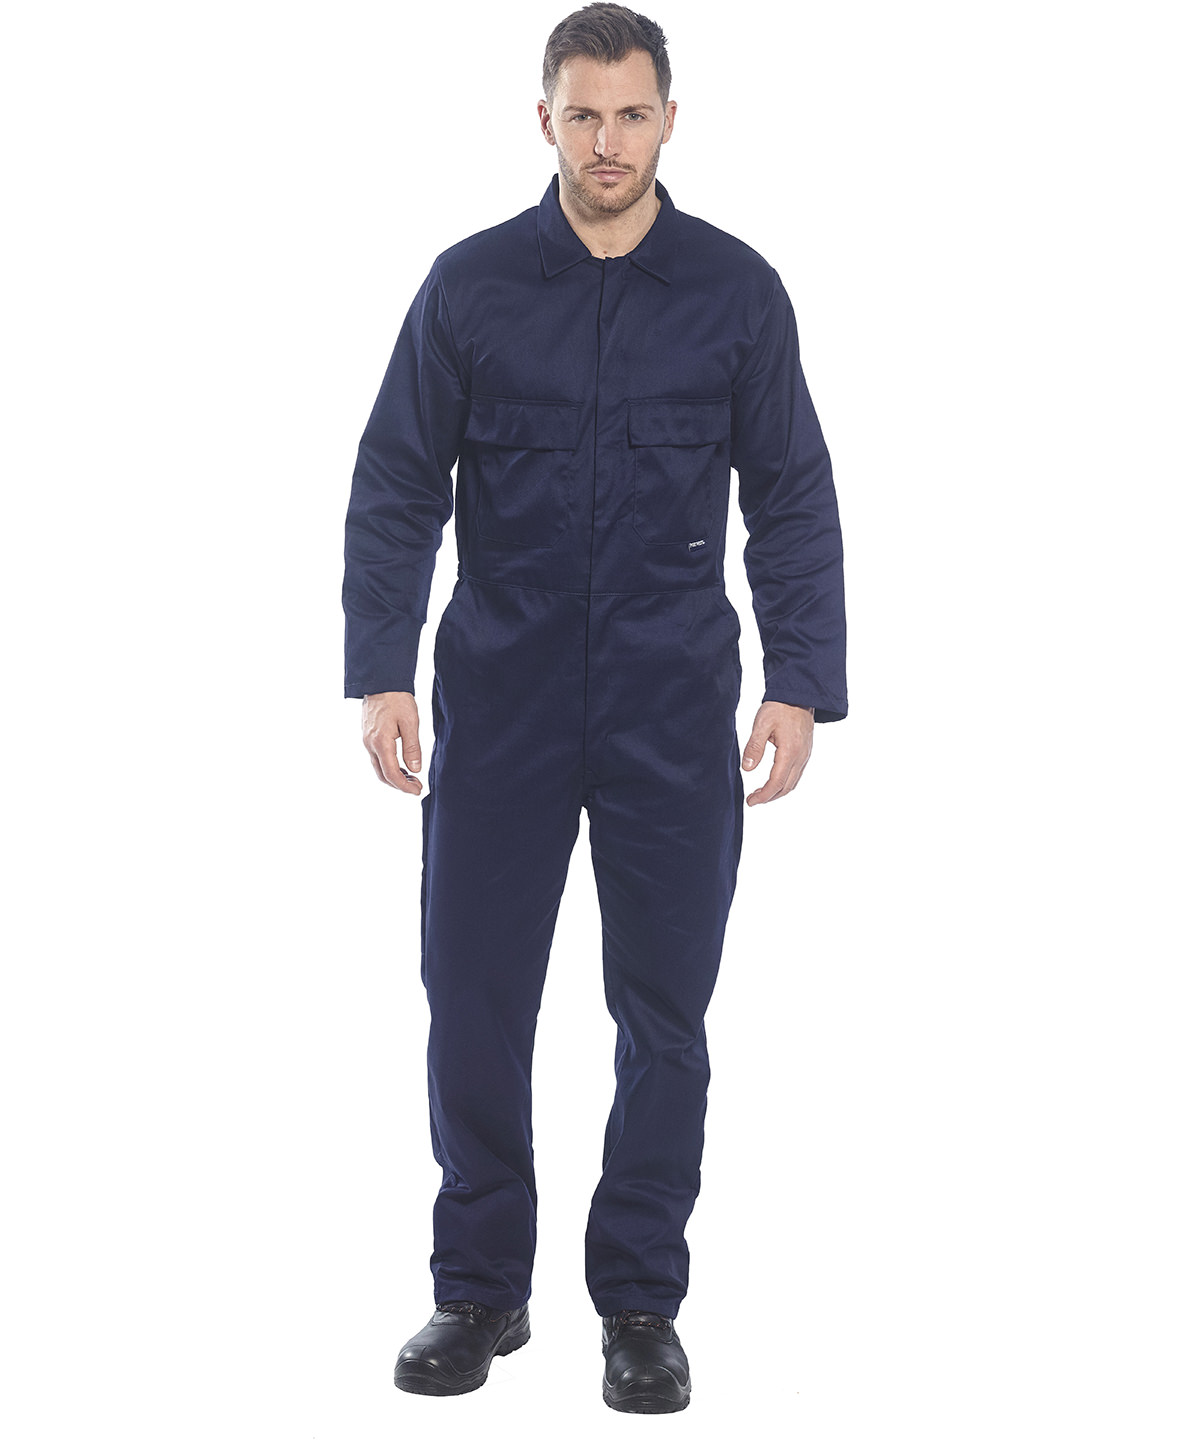 Euro work coverall (S999)